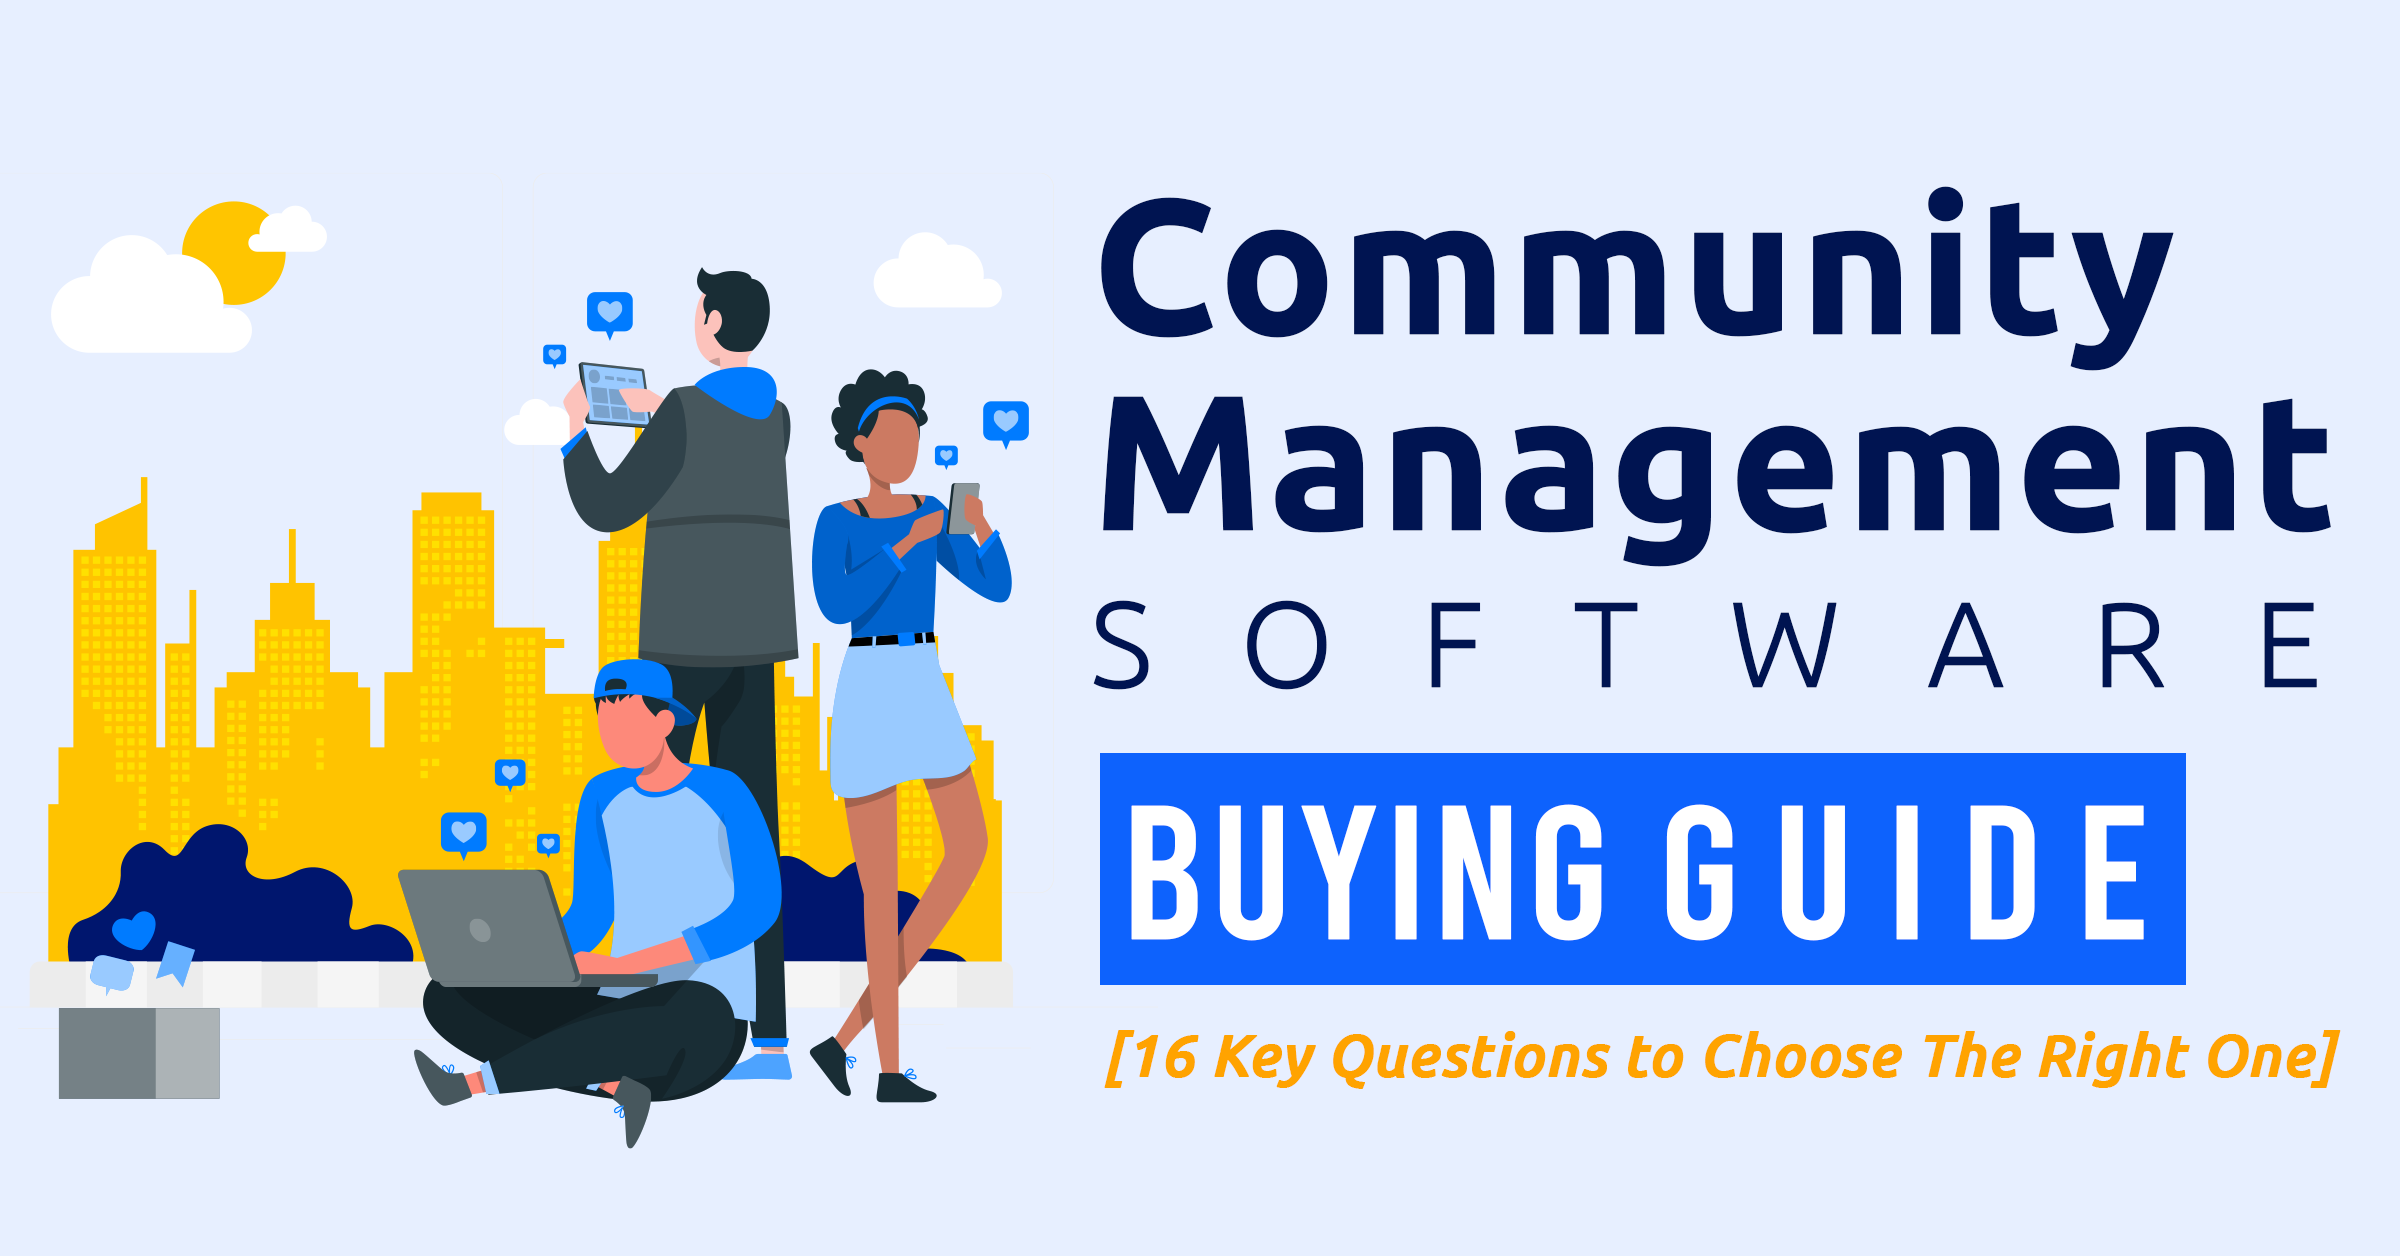 Community Management Software Buying Guide [16 Key Questions to Choose The Right One]